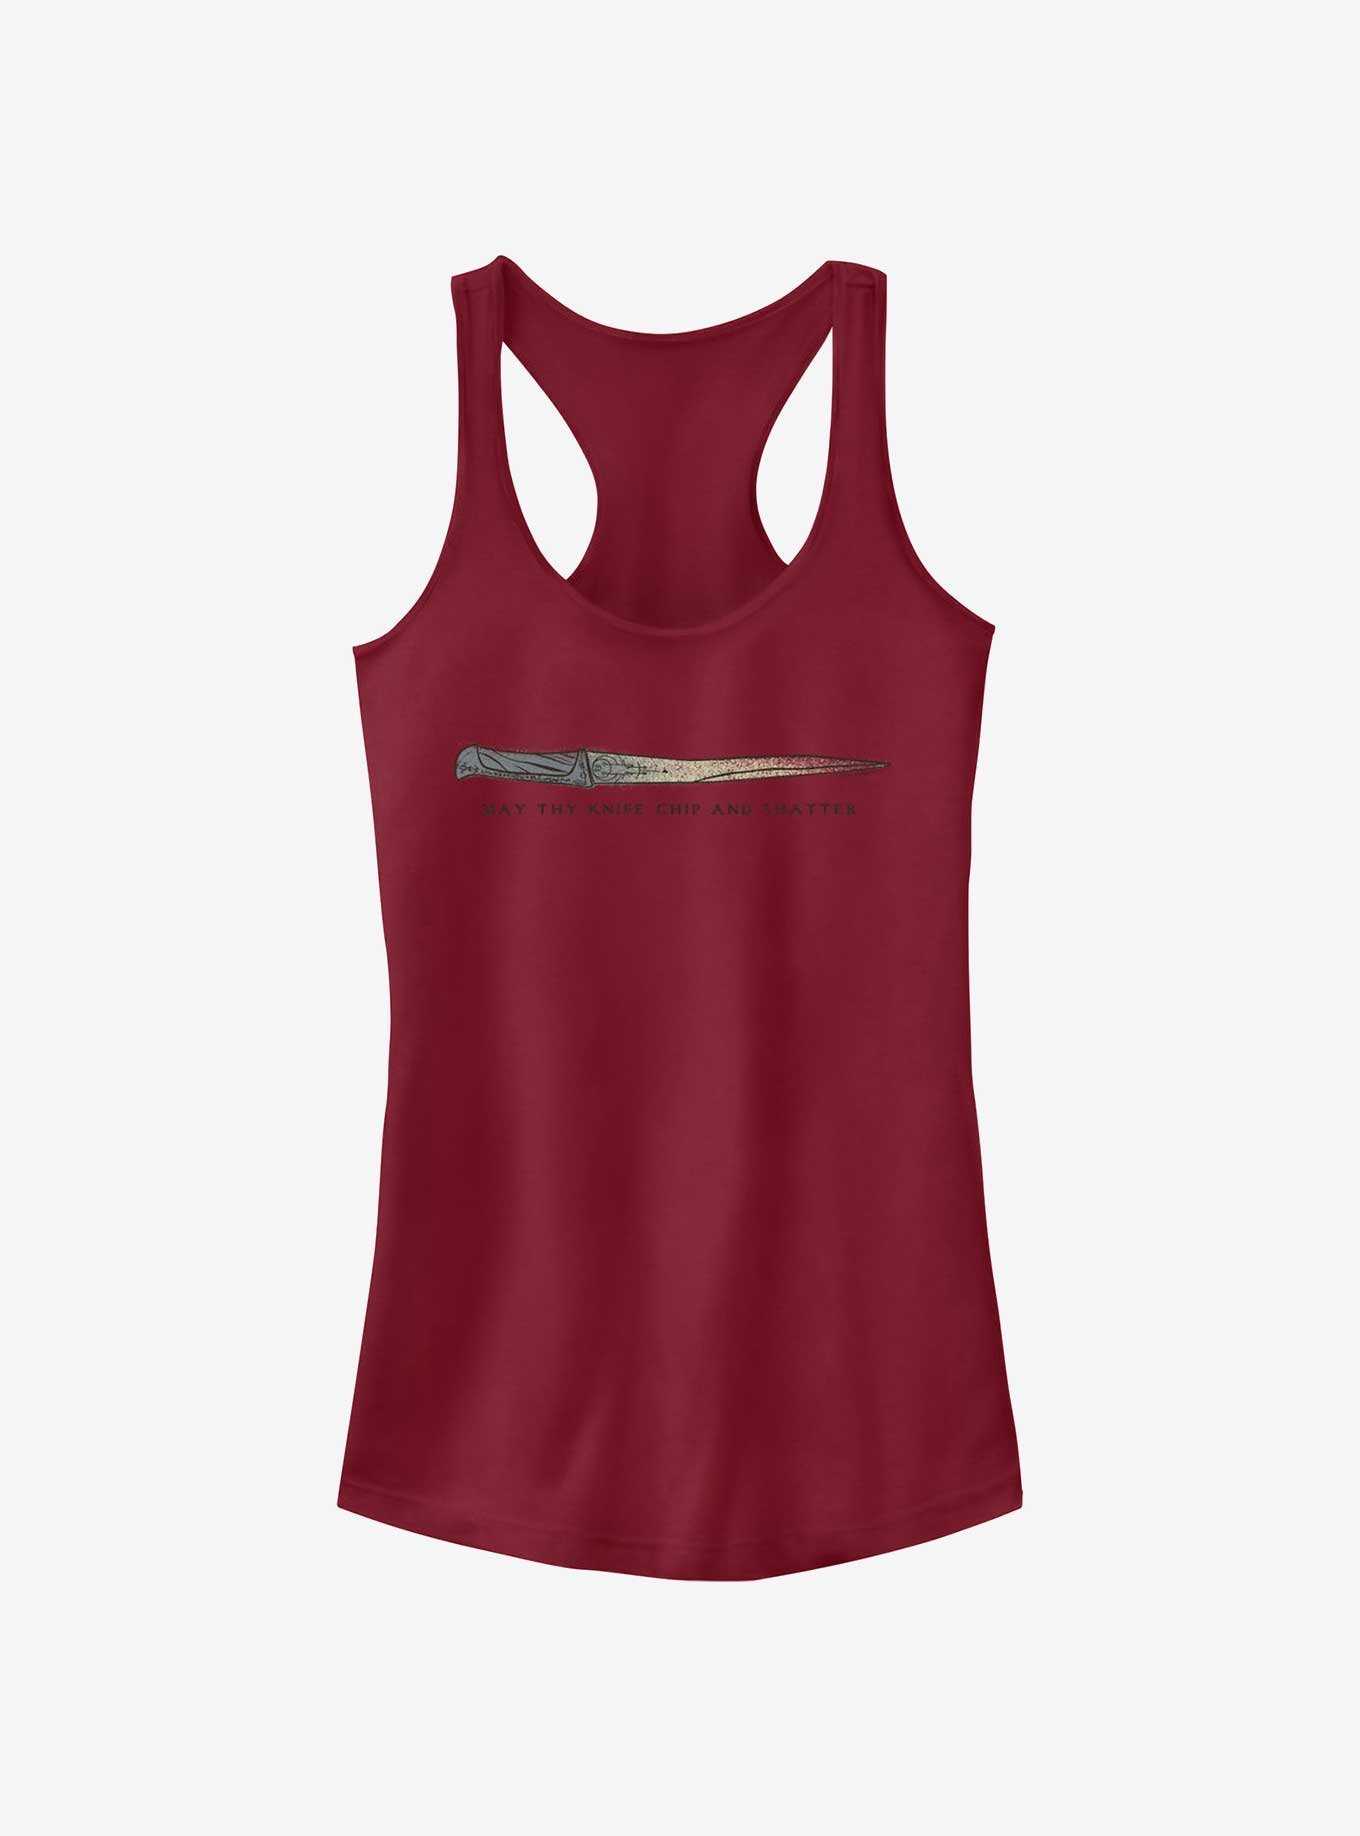 Dune: Part Two Chip And Shatter Girls Tank, , hi-res